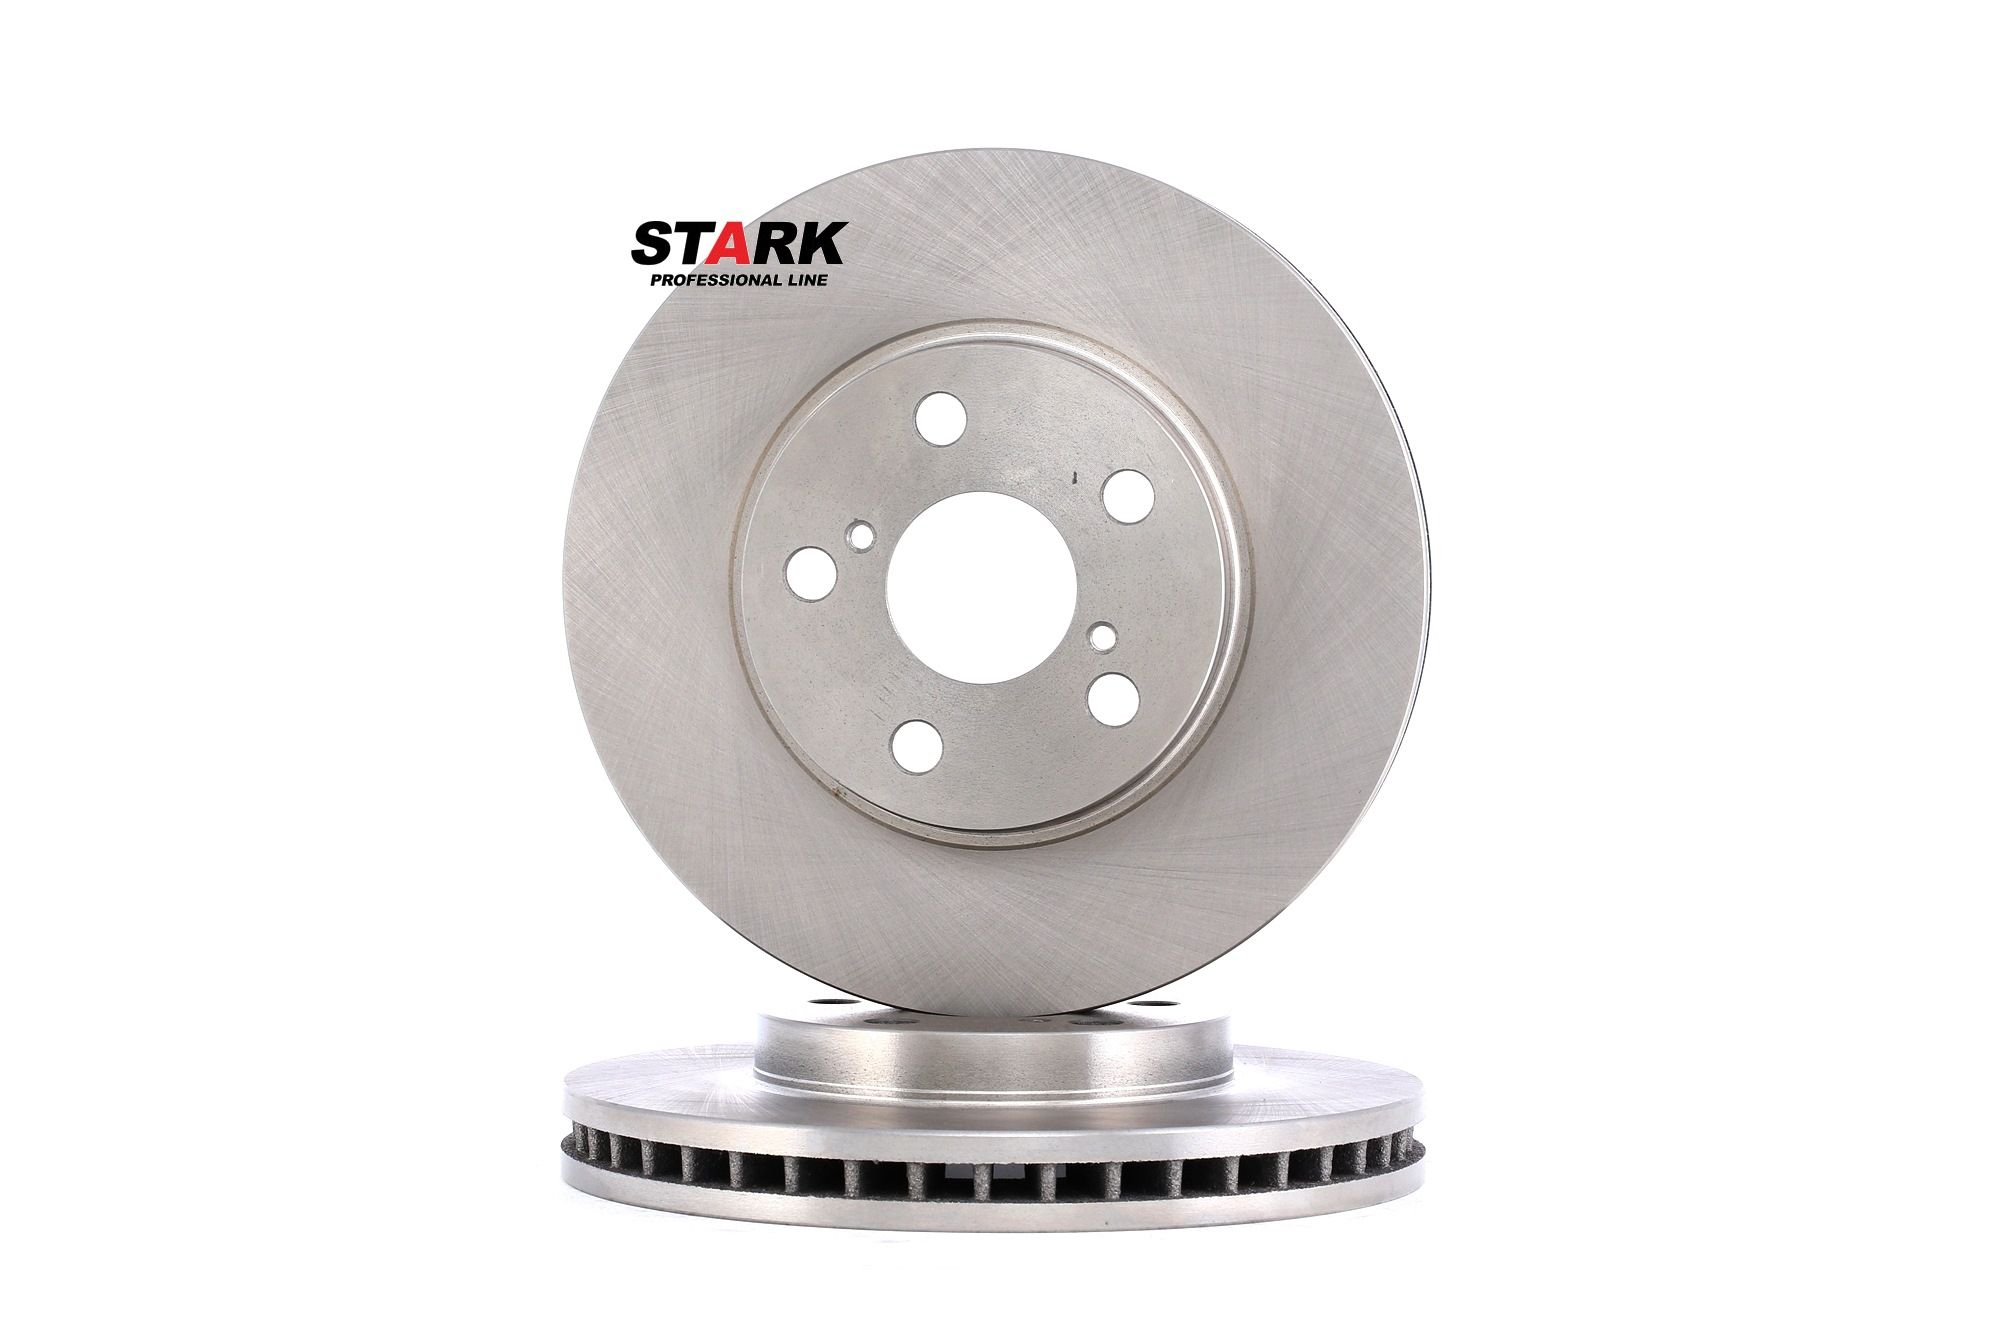 STARK Front Axle, 255, 255,0x28mm, 5x100, Vented Ø: 255, 255,0mm, Num. of holes: 5, Brake Disc Thickness: 28mm Brake rotor SKBD-0022489 buy